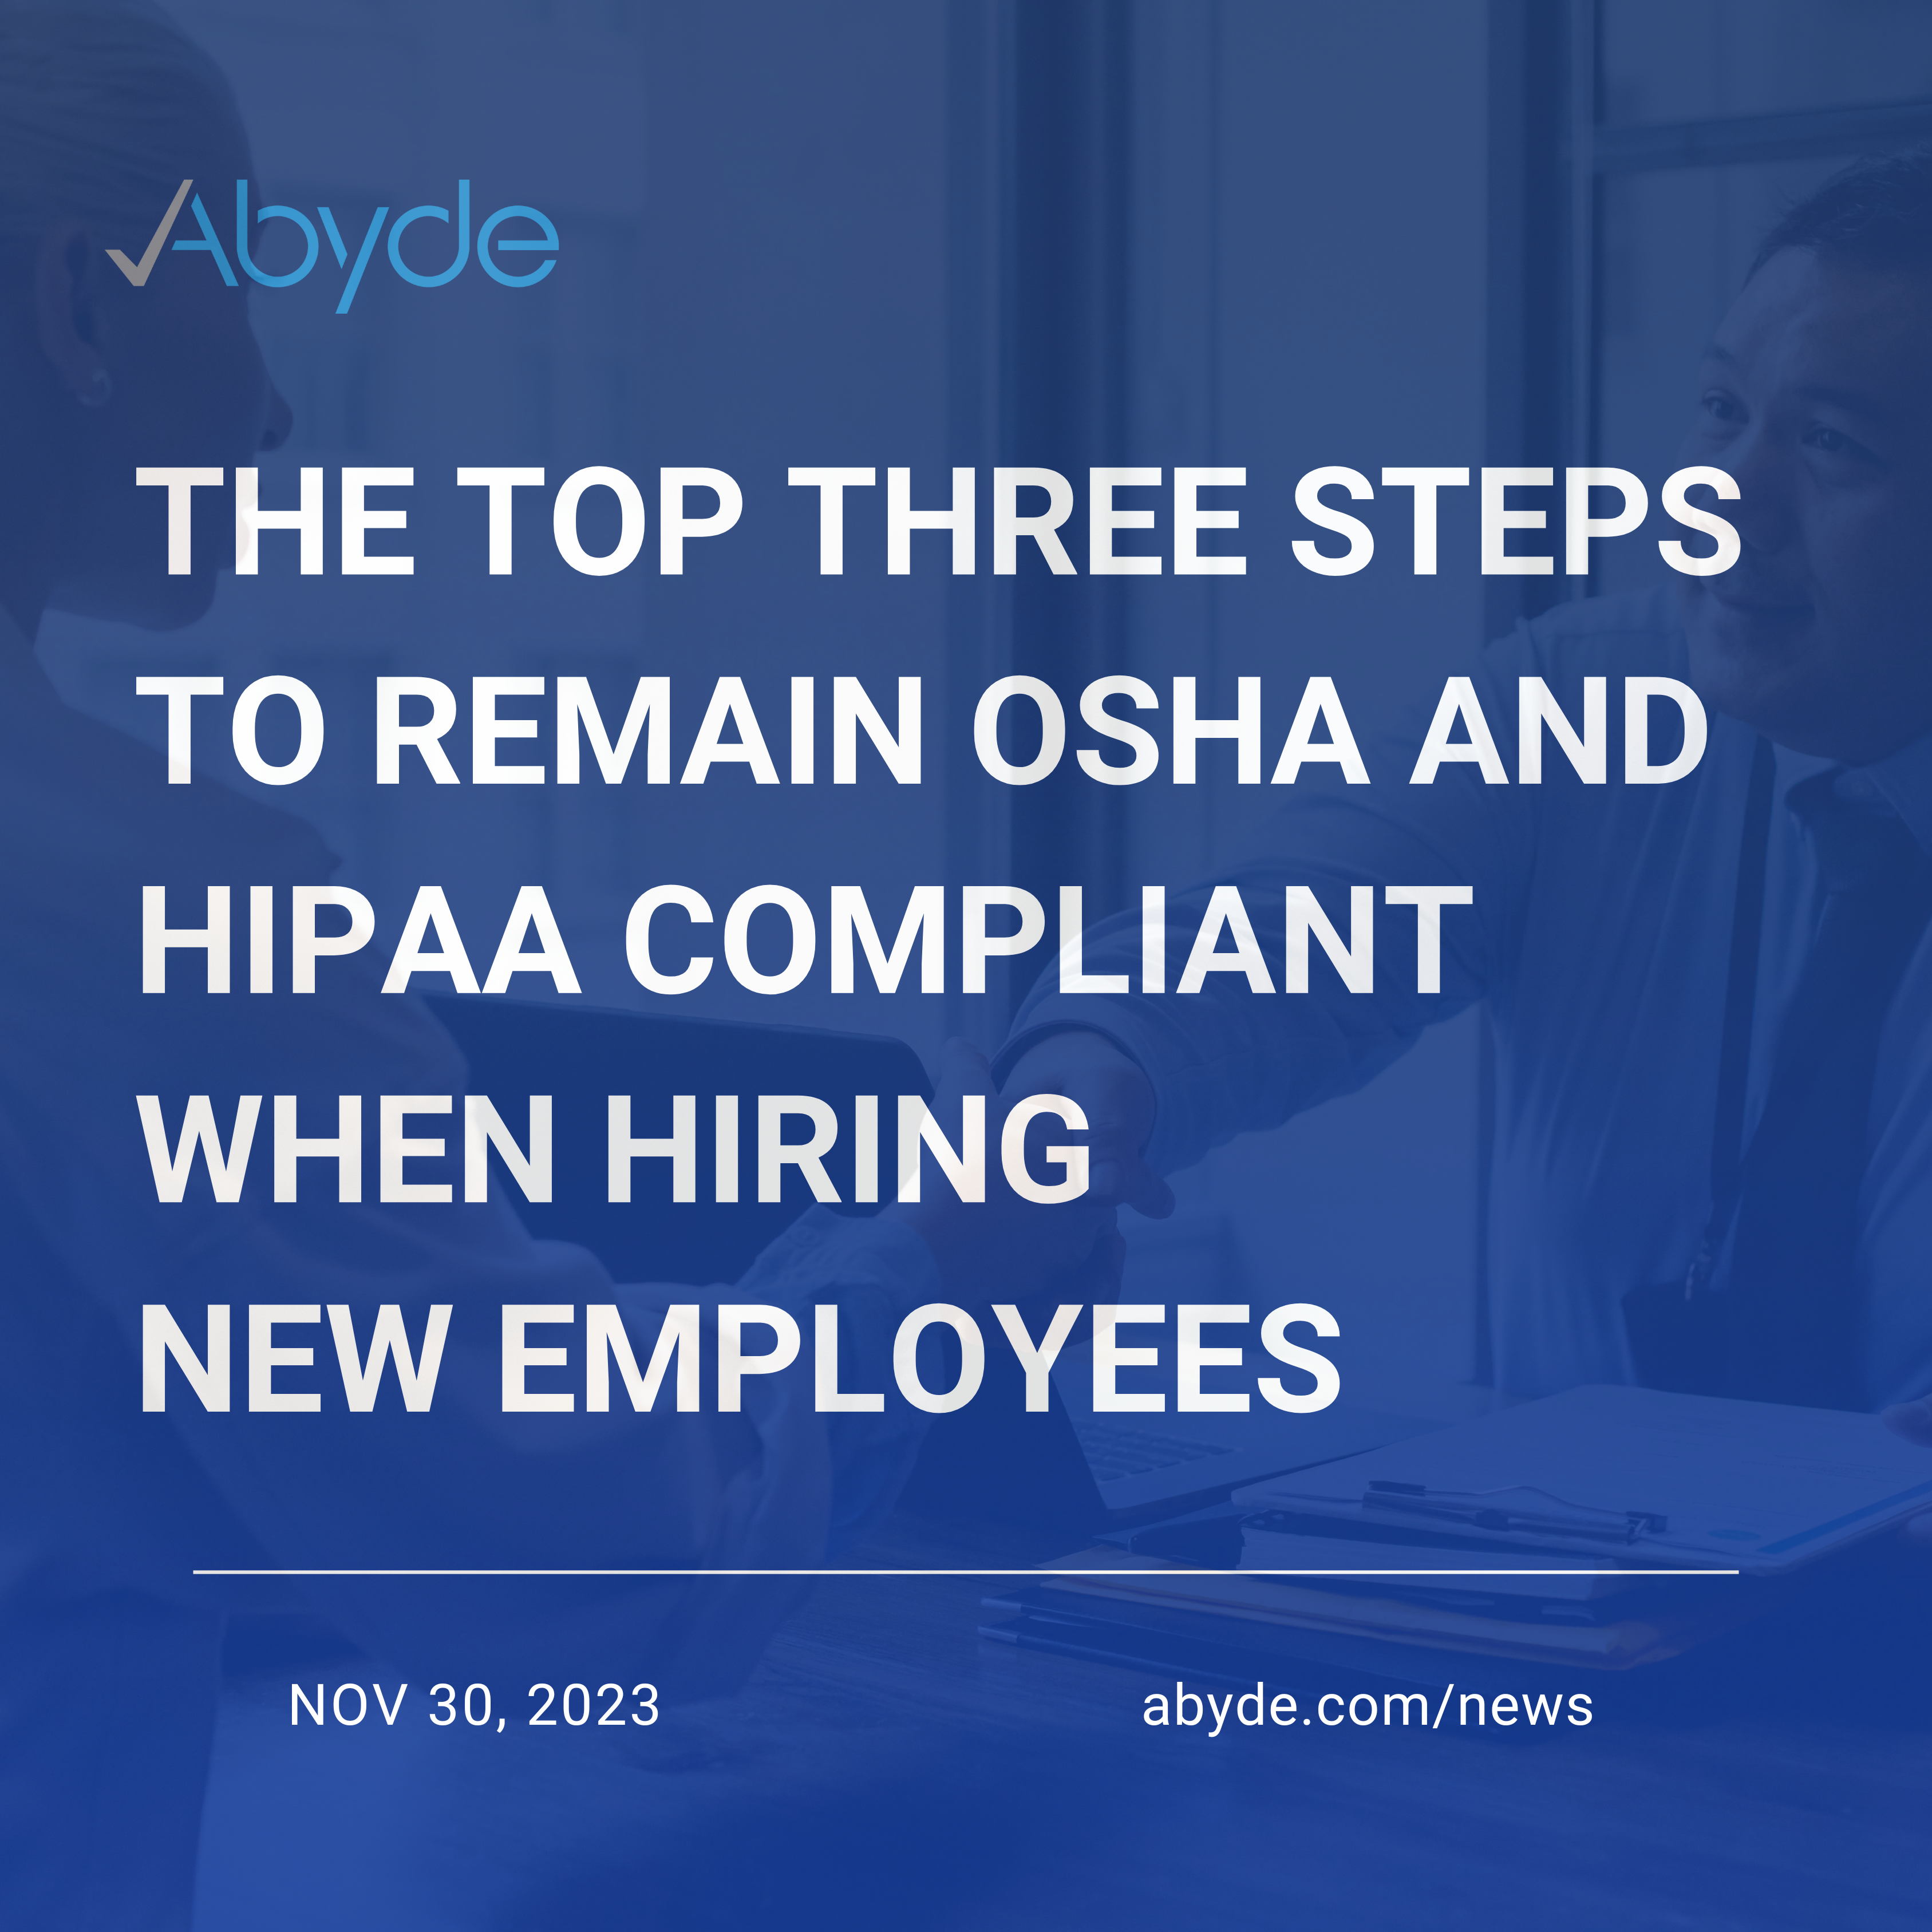 The Top Three Steps to Remain OSHA and HIPAA Compliant when Hiring New Employees